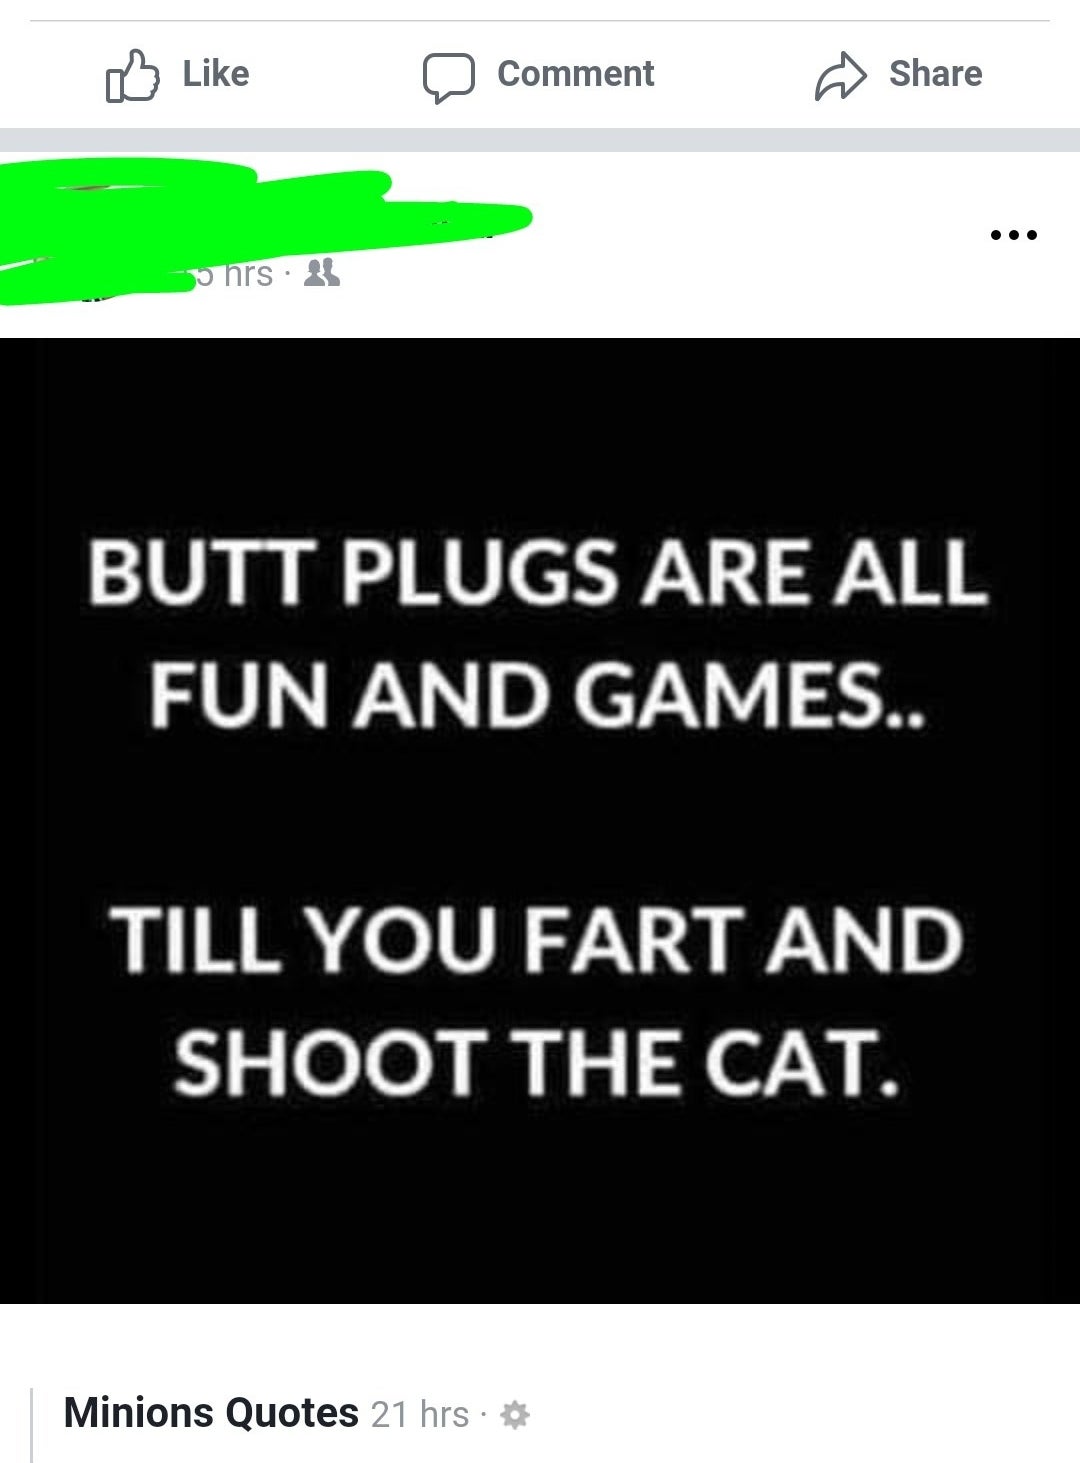 A joke from a page called &quot;Minions Quotes&quot; that says &quot;butt plugs are all fun and games until you fart and shoot the cat&quot;